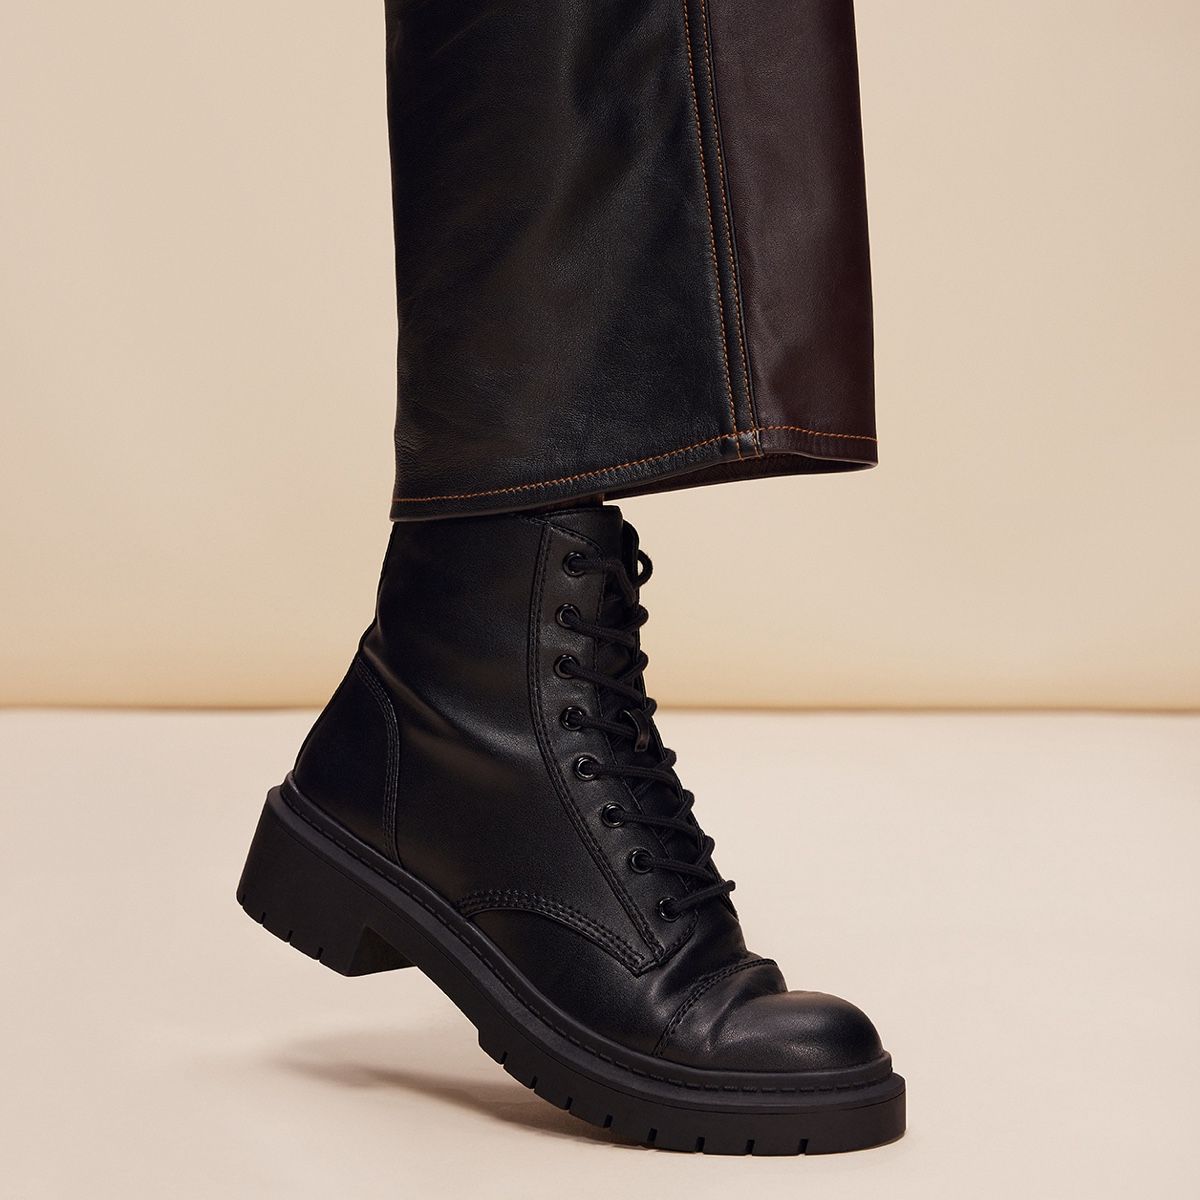 Goer Black Synthetic Smooth Women's Casual boots | ALDO Canada